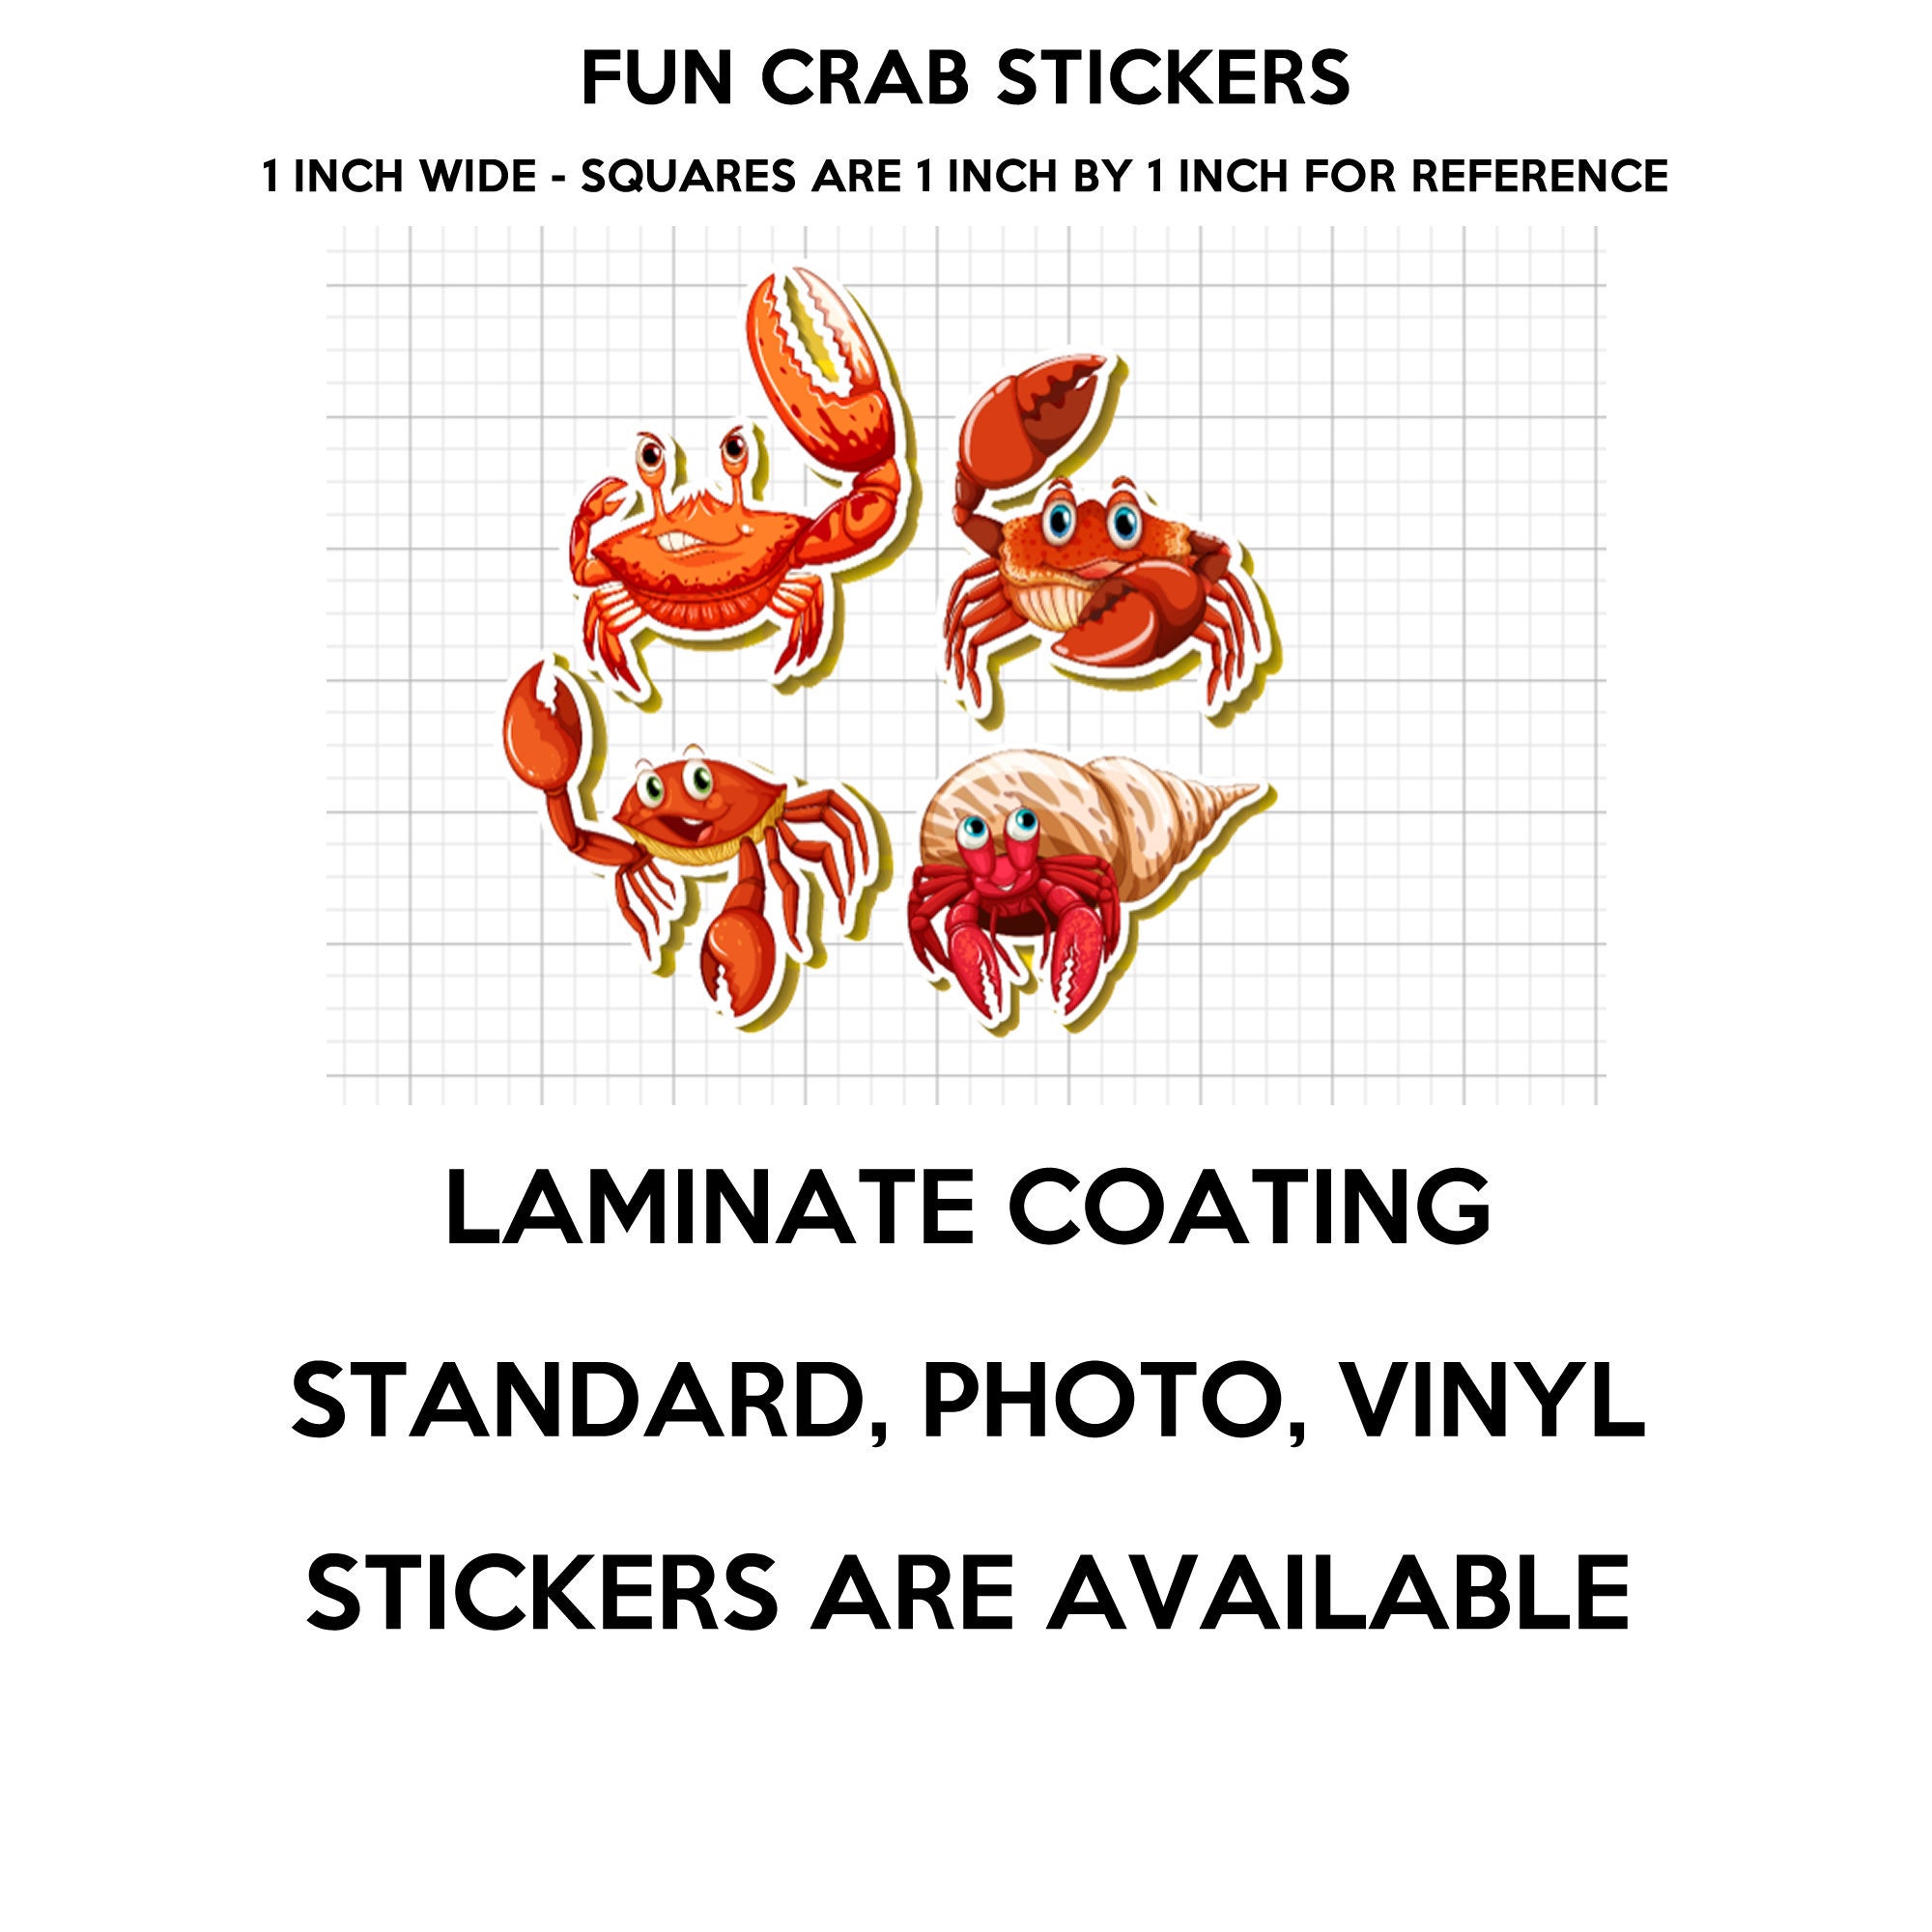 4 CRAB stickers in standard, photo or vinyl print materials with laminate or magnet options available.  Premium full color.